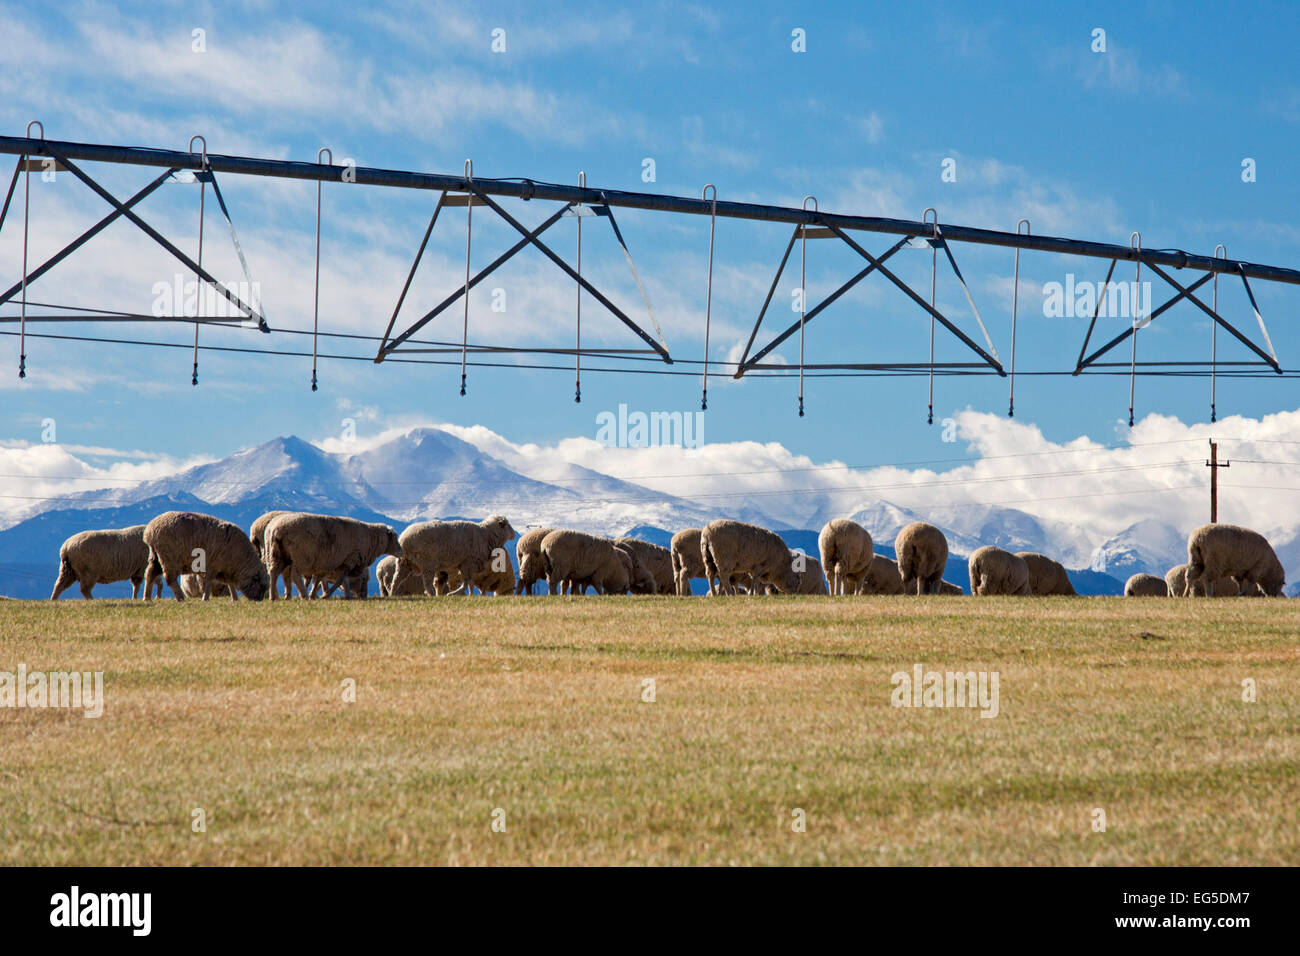 Ft. Collins, Colorado - Sheep graze below irrigation equipment on a ranch near the snow-capped Rocky Mountains. Stock Photo